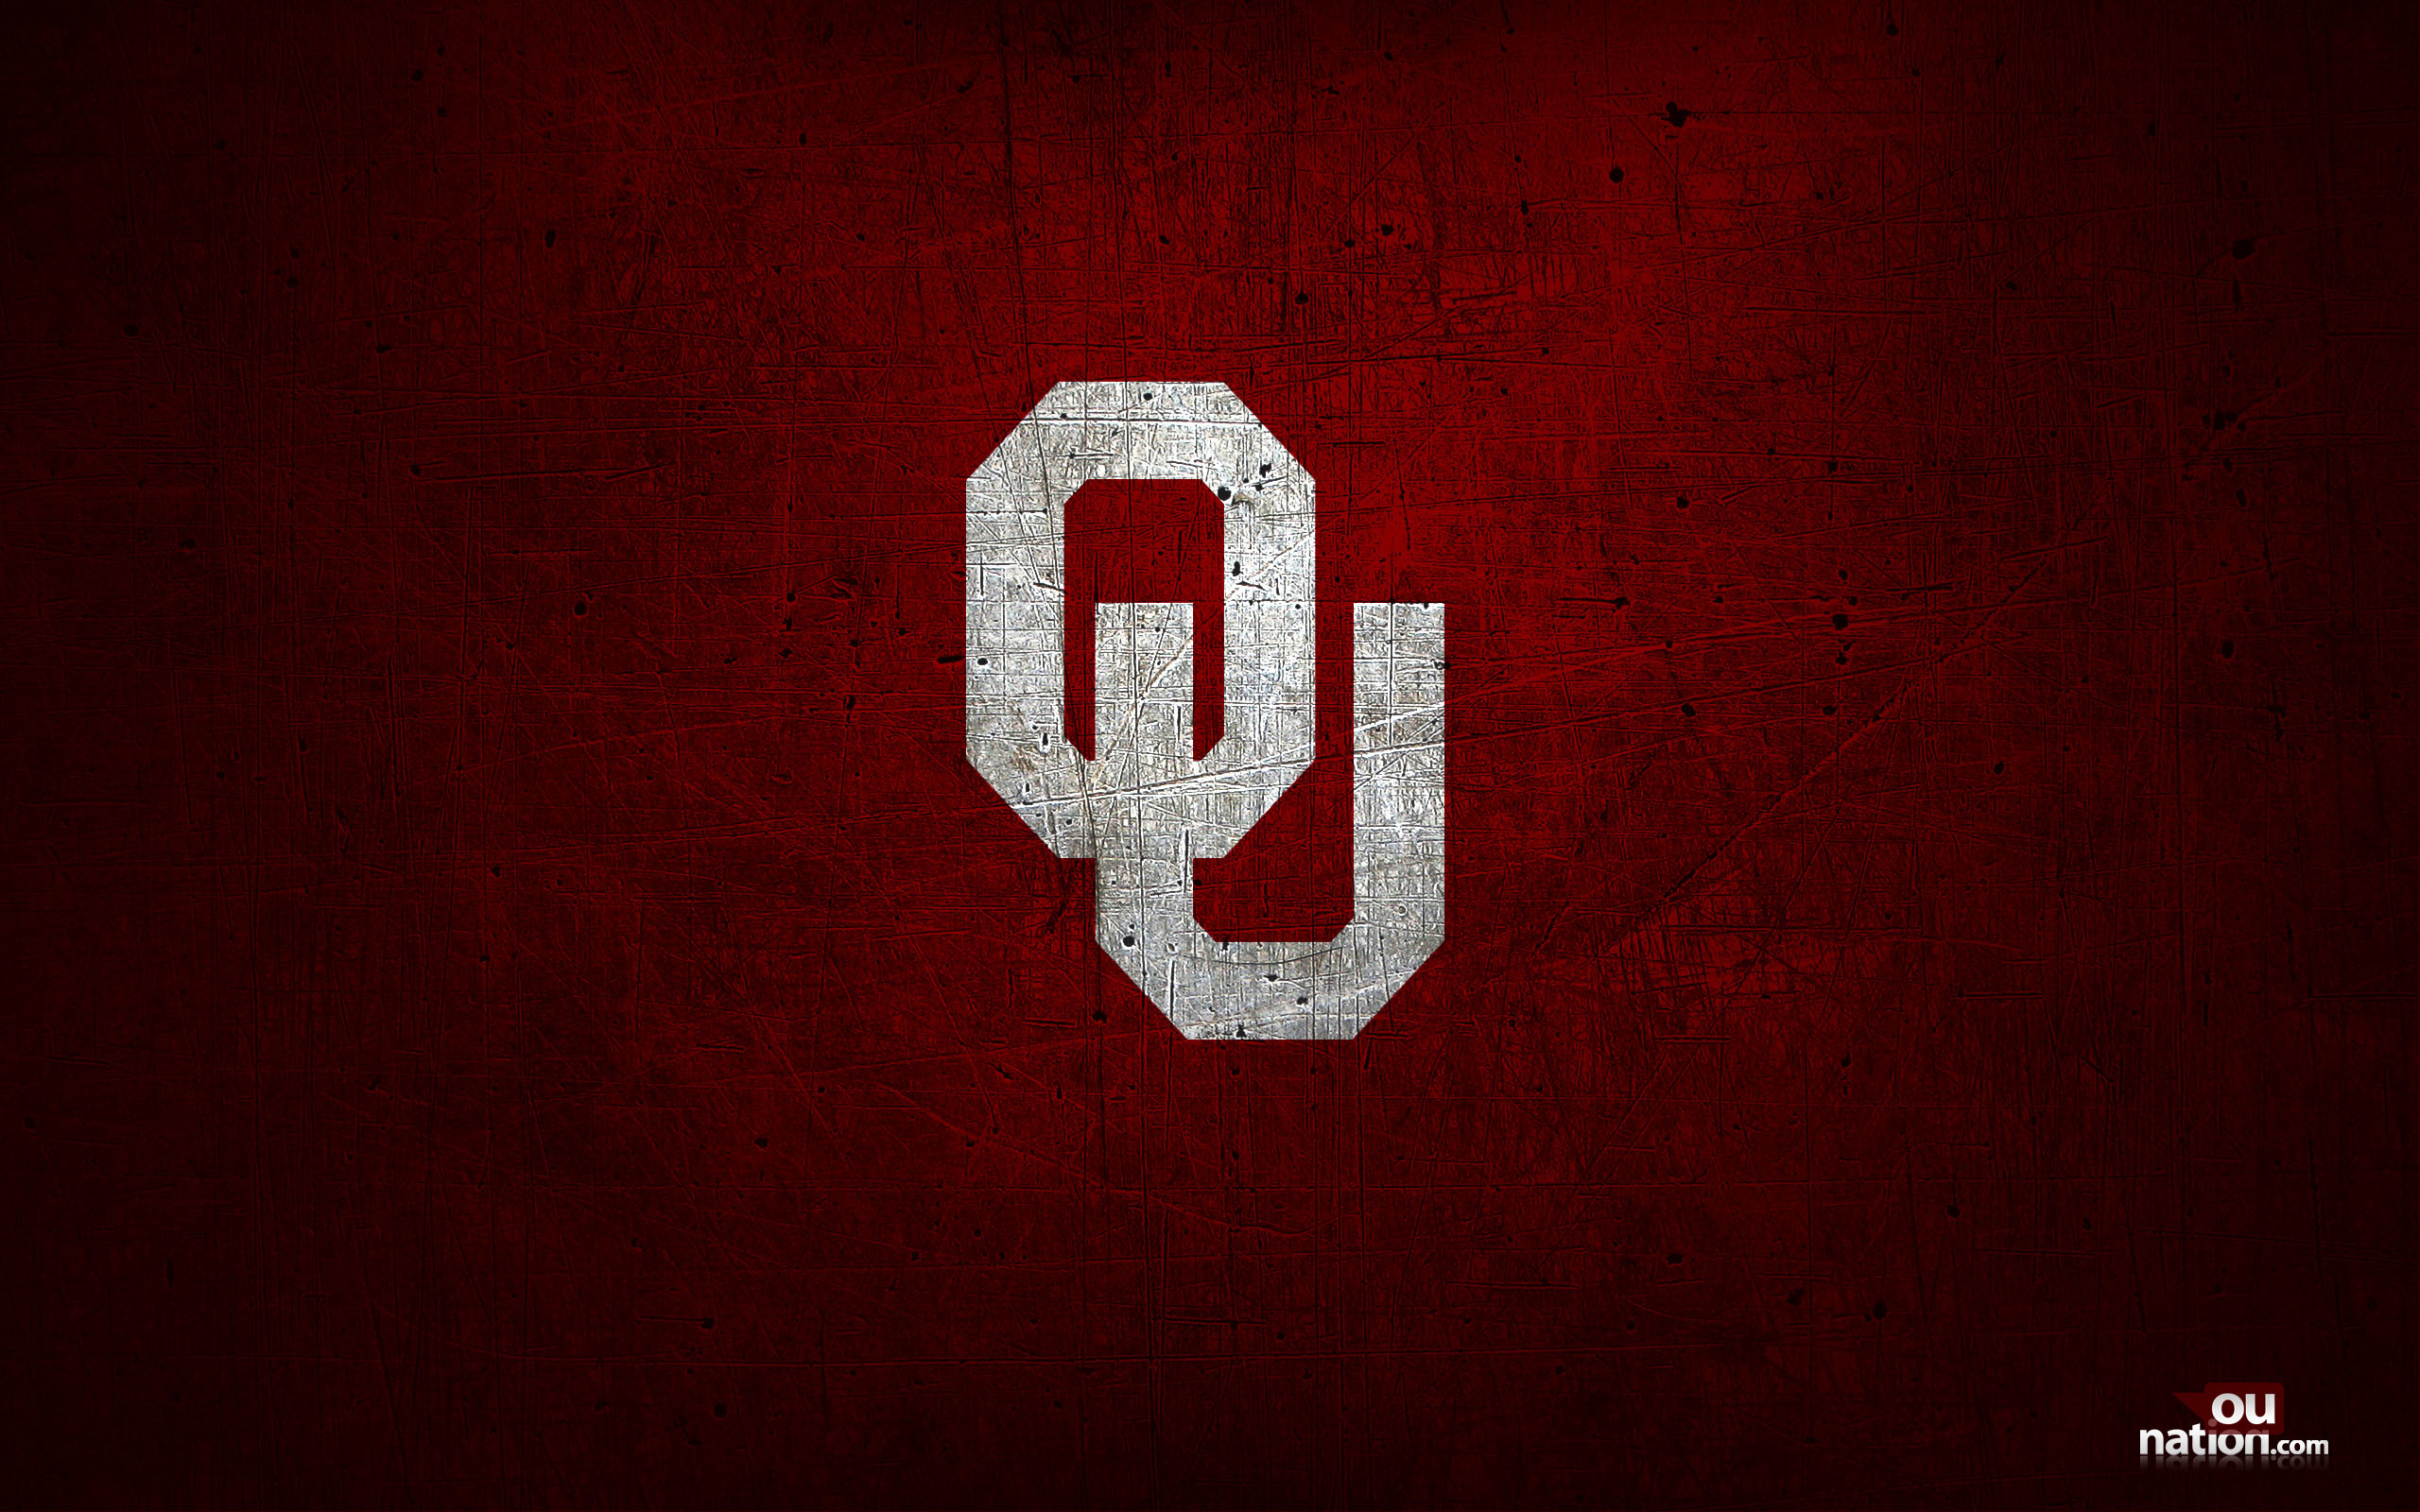 2560x1600 OUnation.com | University of Oklahoma Themed Wallpapers Free for .